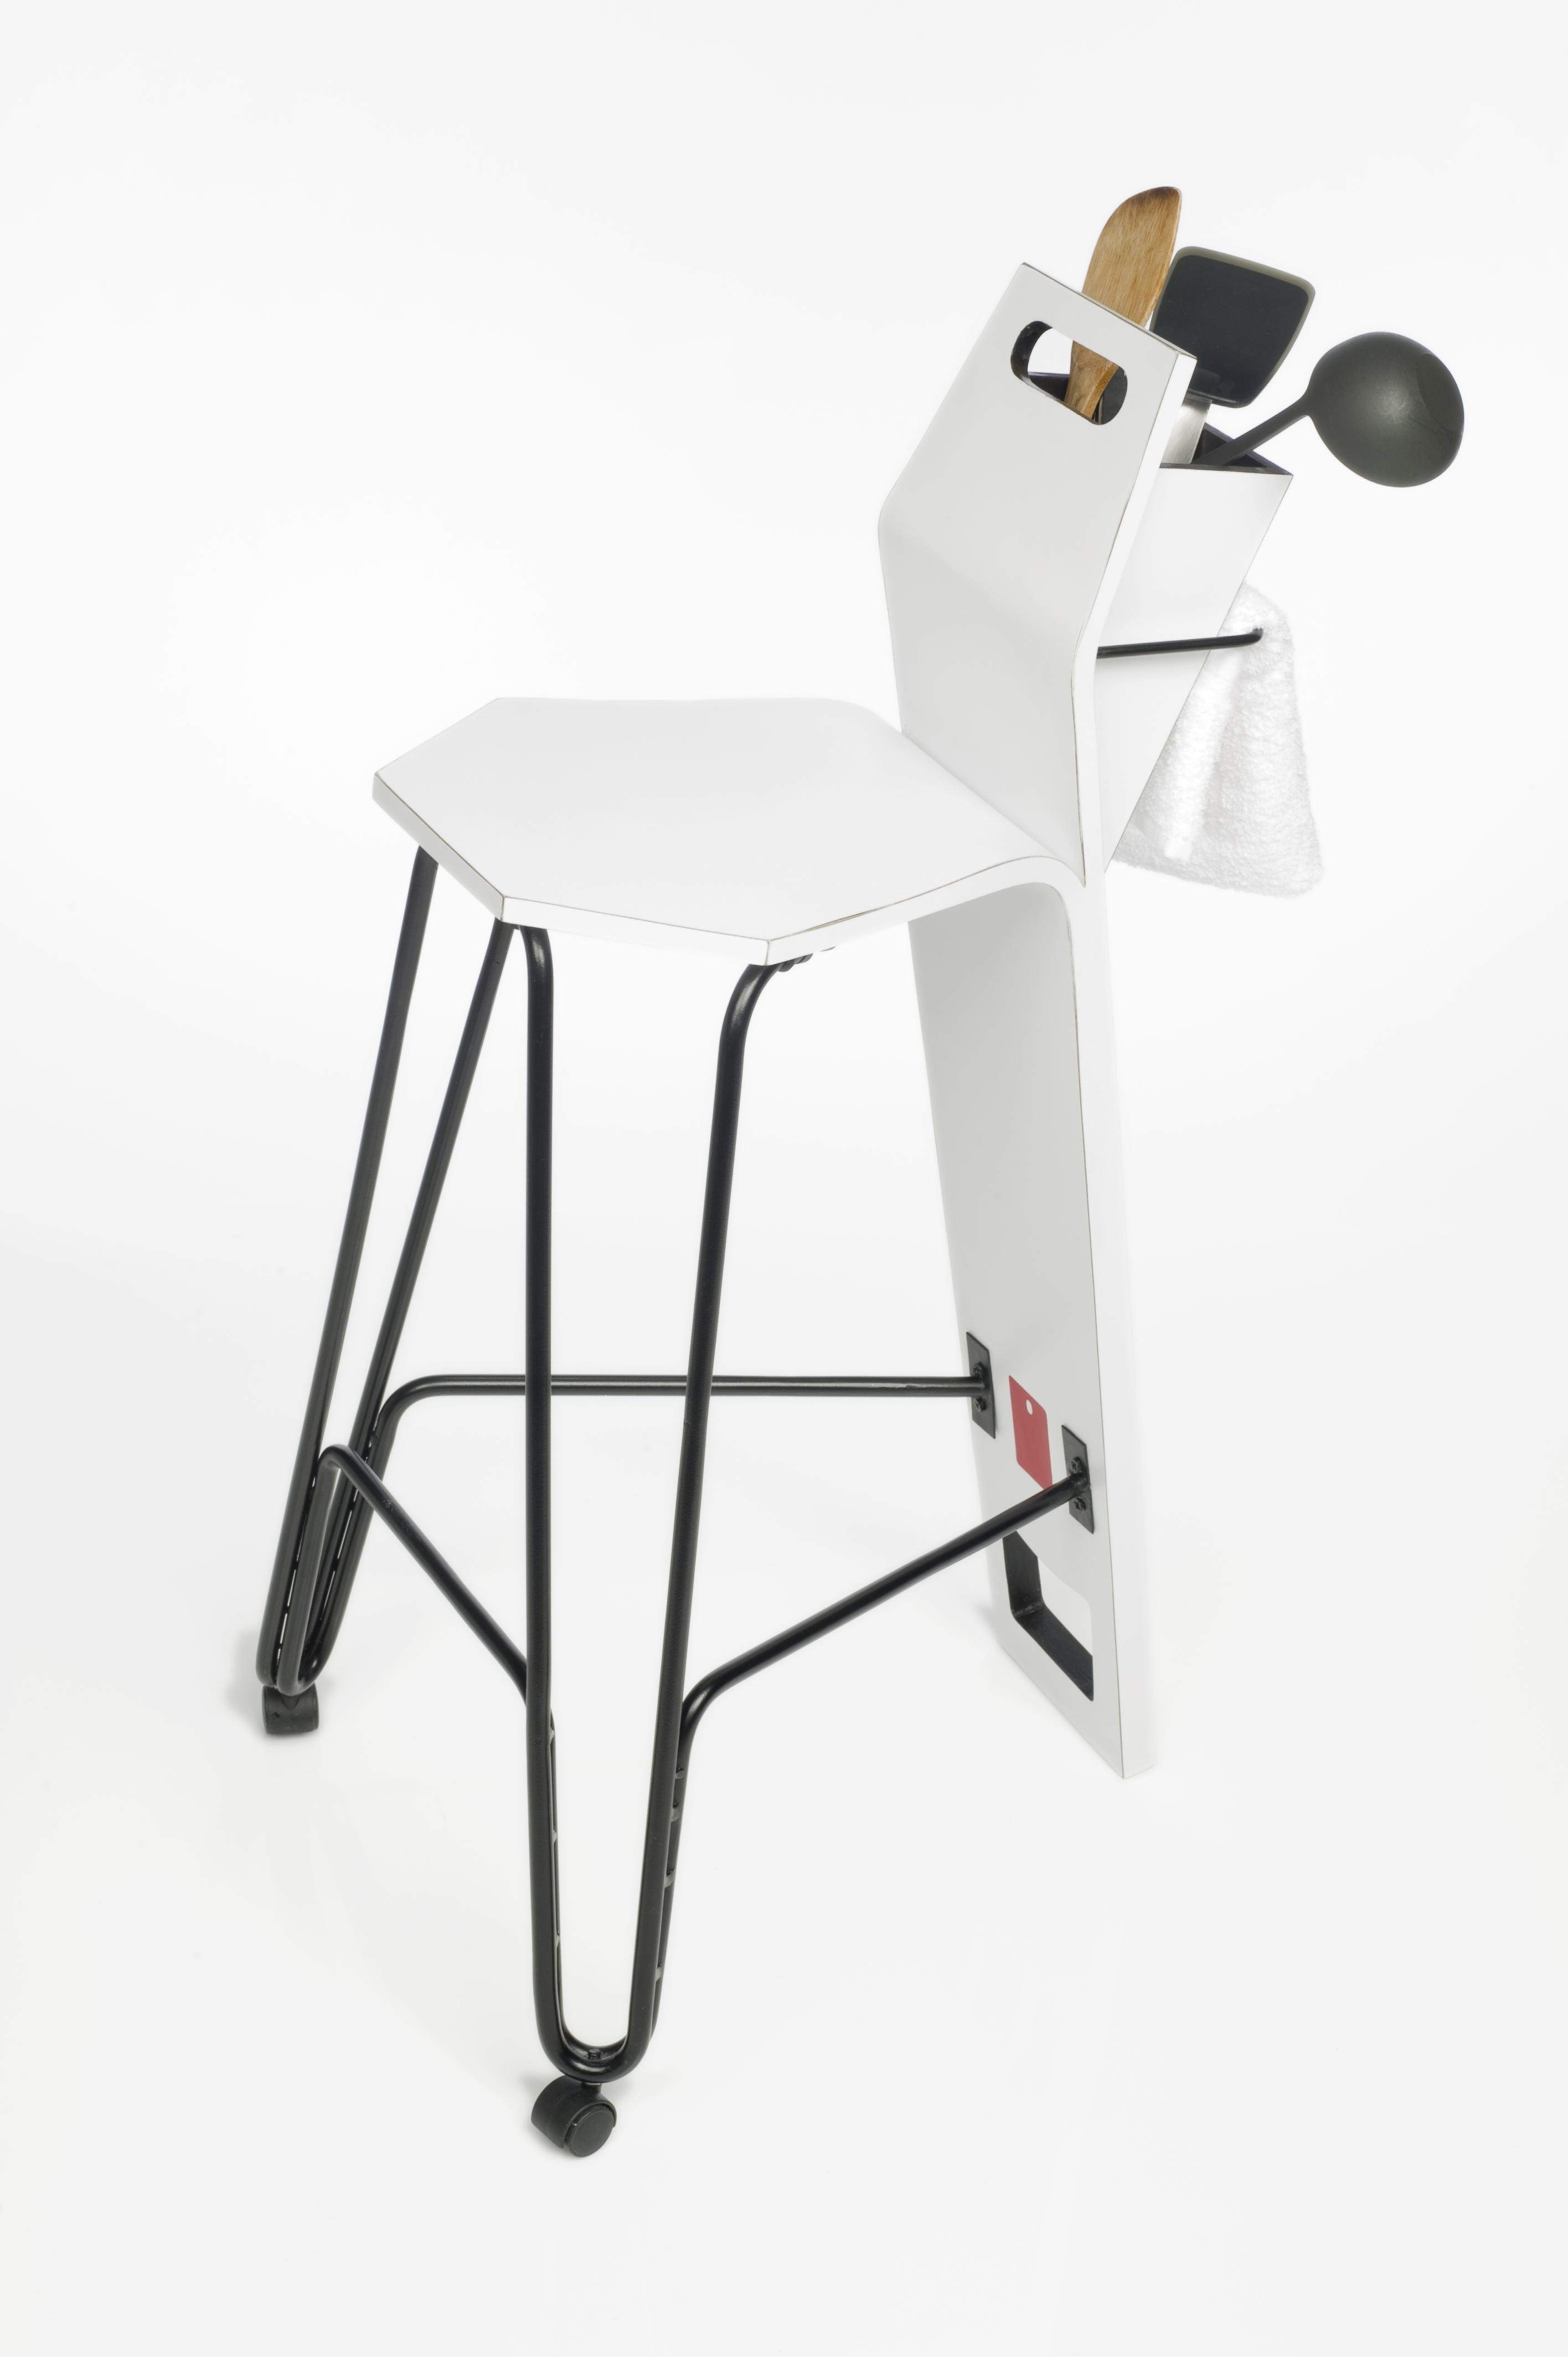 A chair with pockets to store tools.